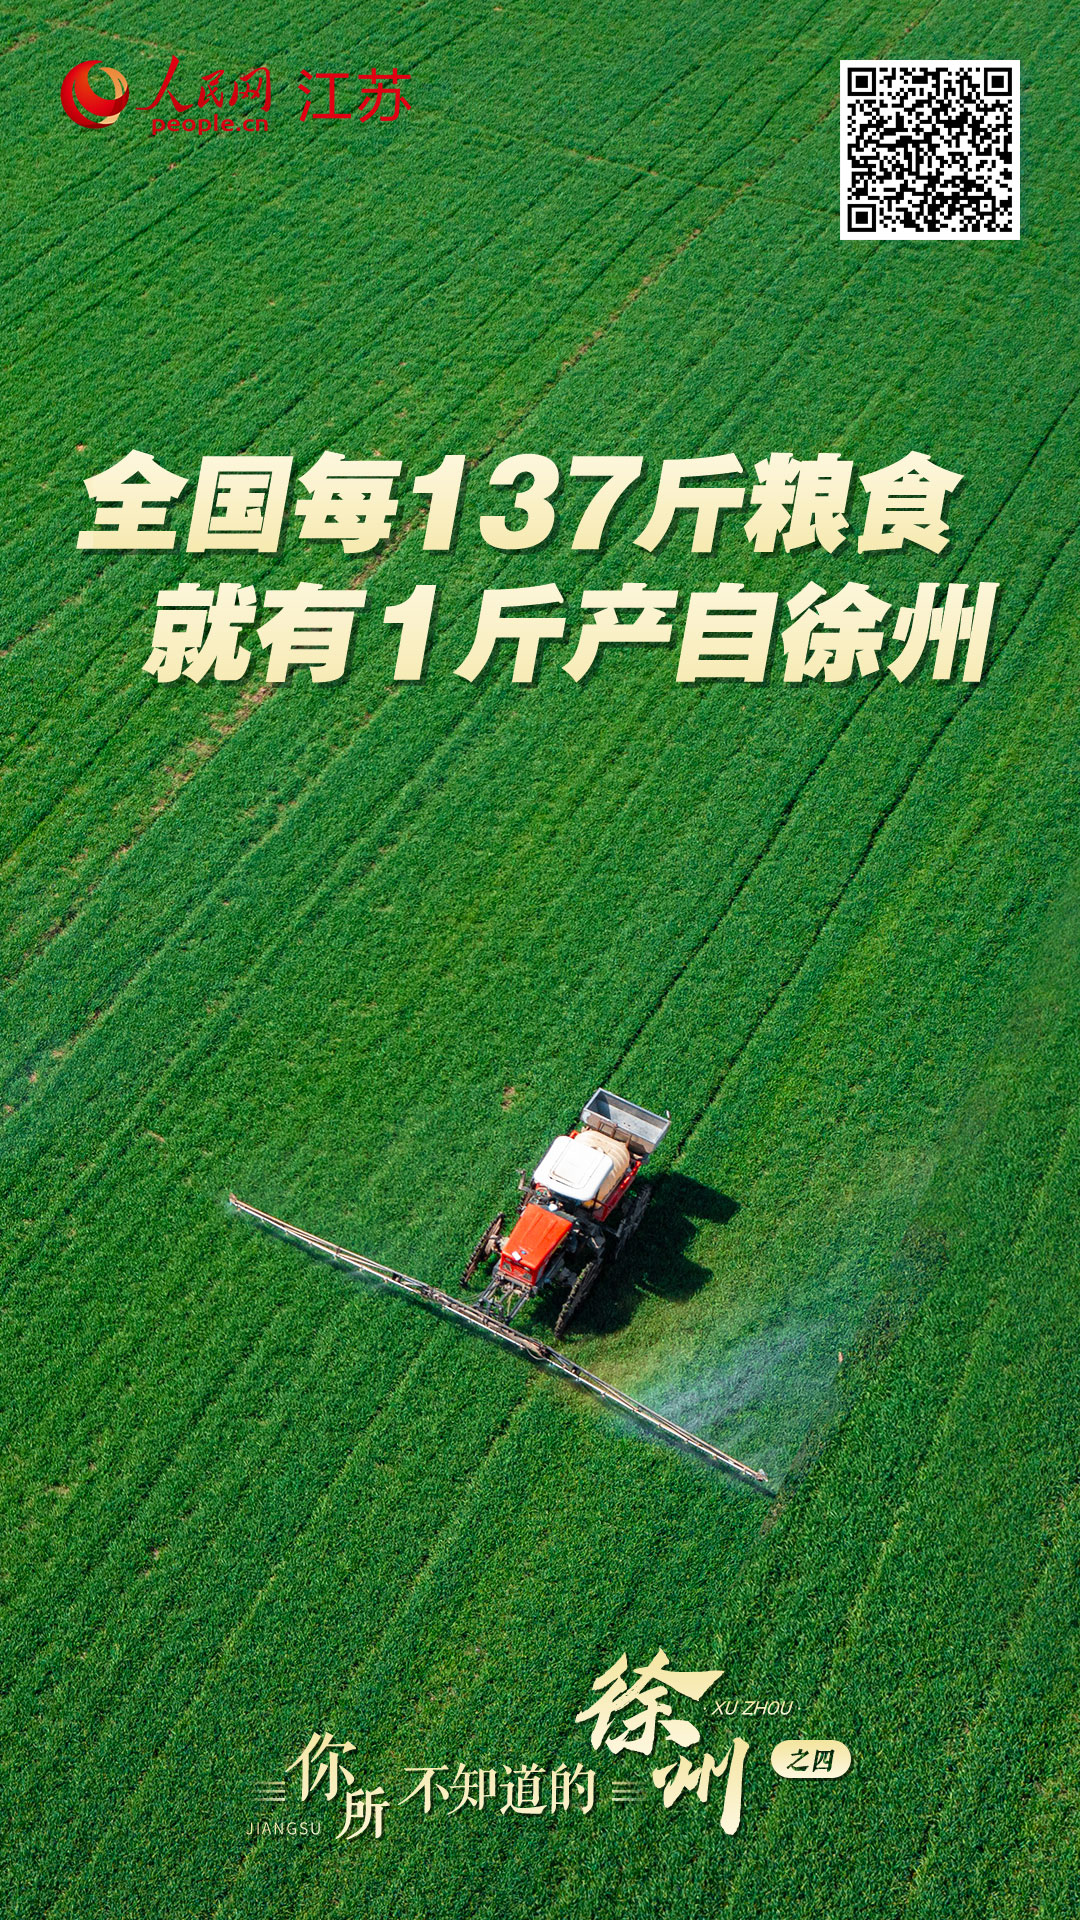  One jin of grain is produced in Xuzhou for every 137 jin of grain in China